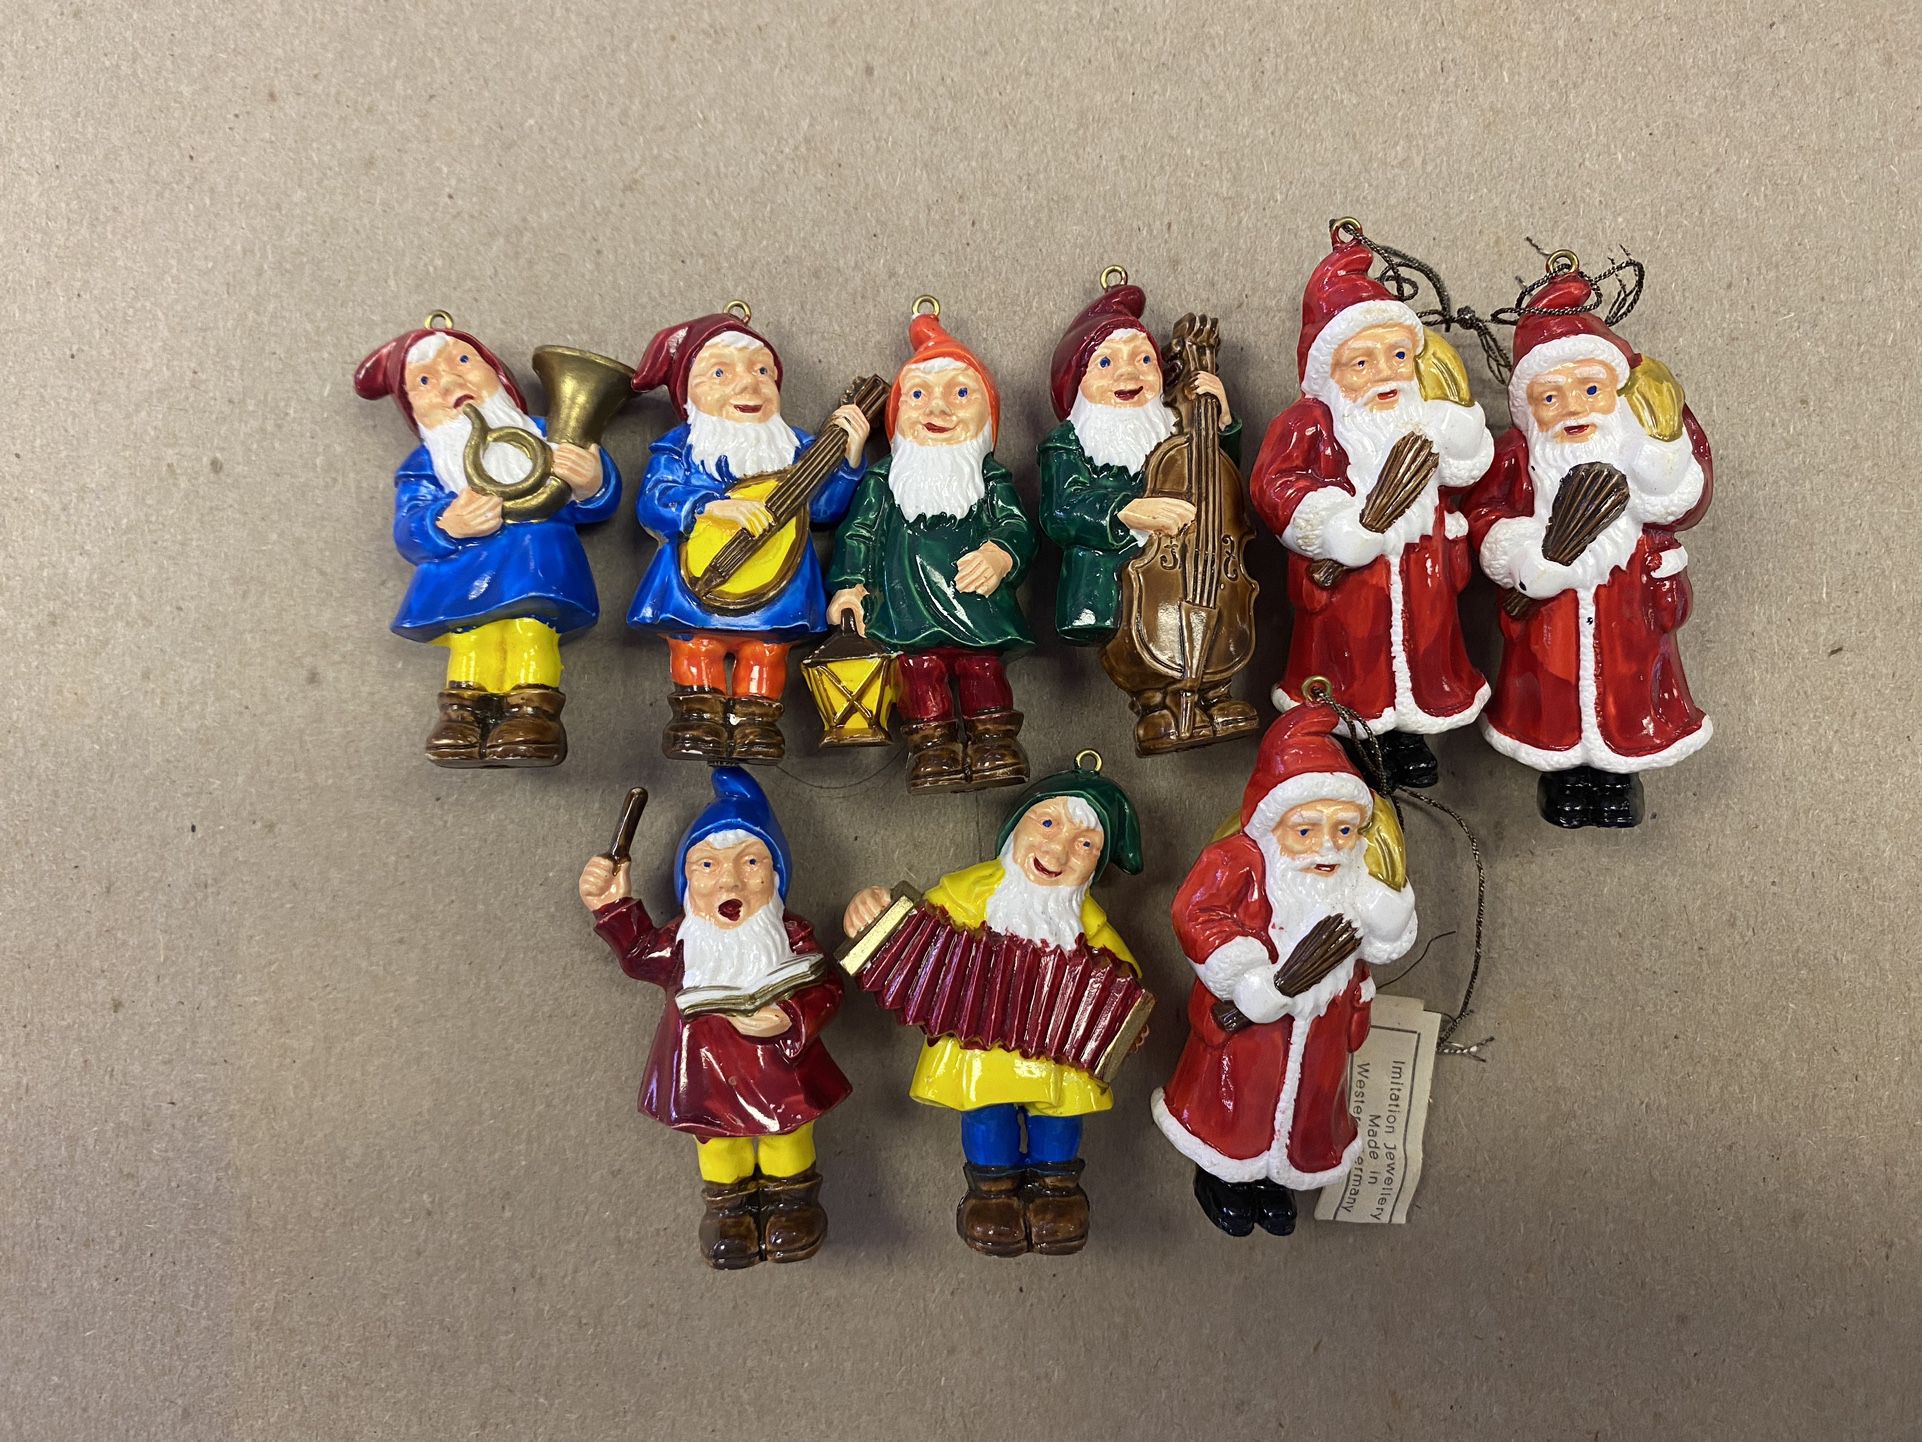 Vintage Christmas ornaments..tiny blow mold ..made in western Germany ..1940 era 